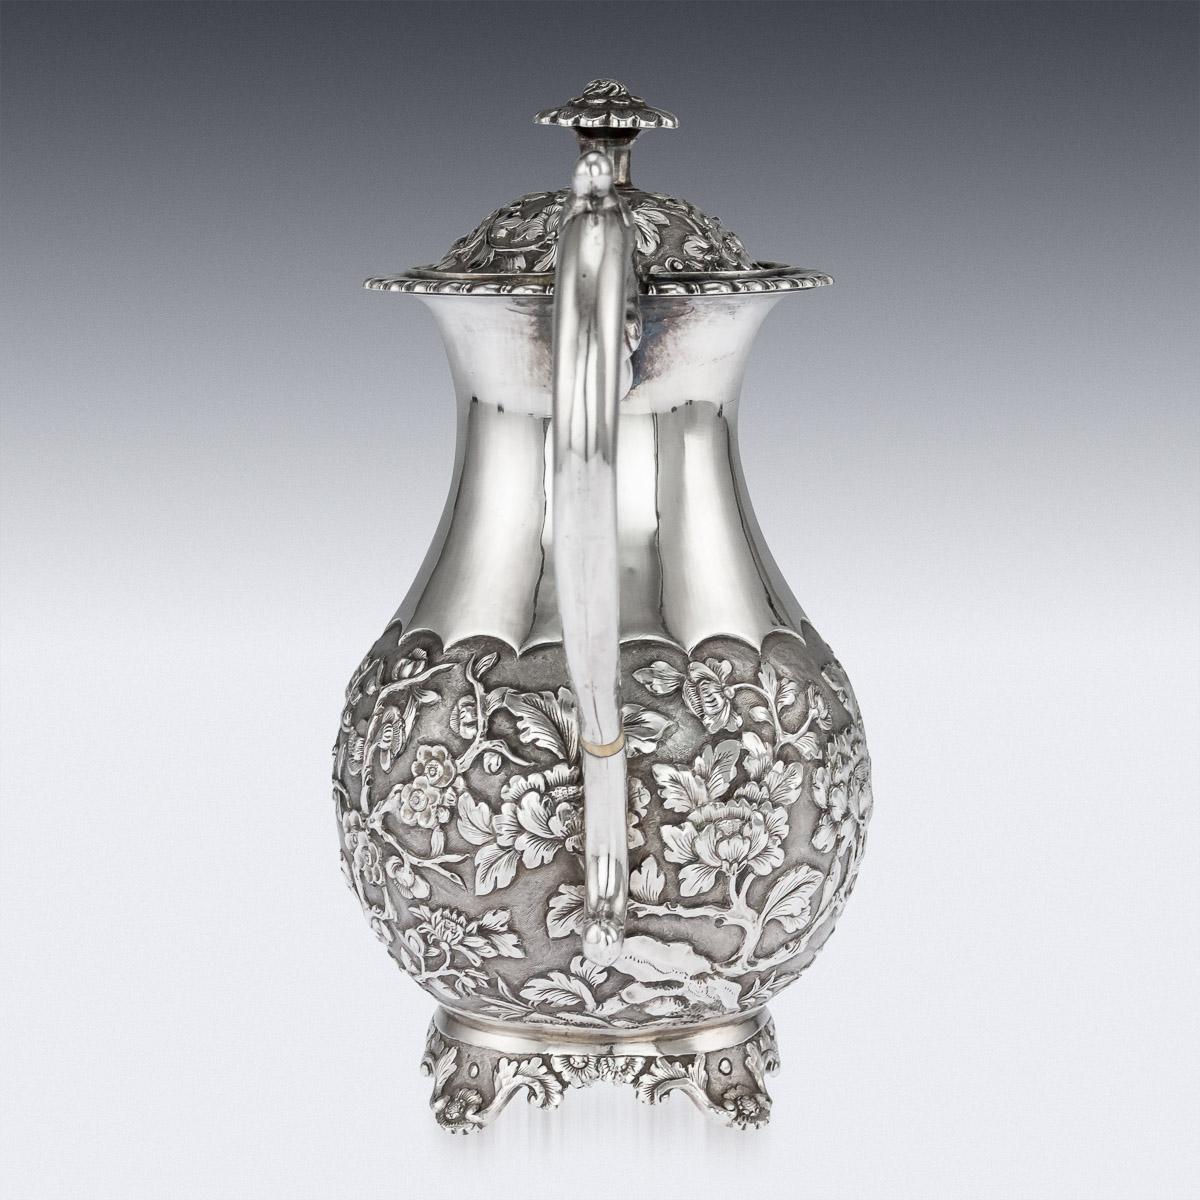 Antique 19th Century Chinese export solid silver coffee pot, pear-shaped, the body is beautifully decorated in relief with chrysanthemums and cherry blossom on matted ground, very crisp and detailed, mounted with an elegant leaf-capped handle and